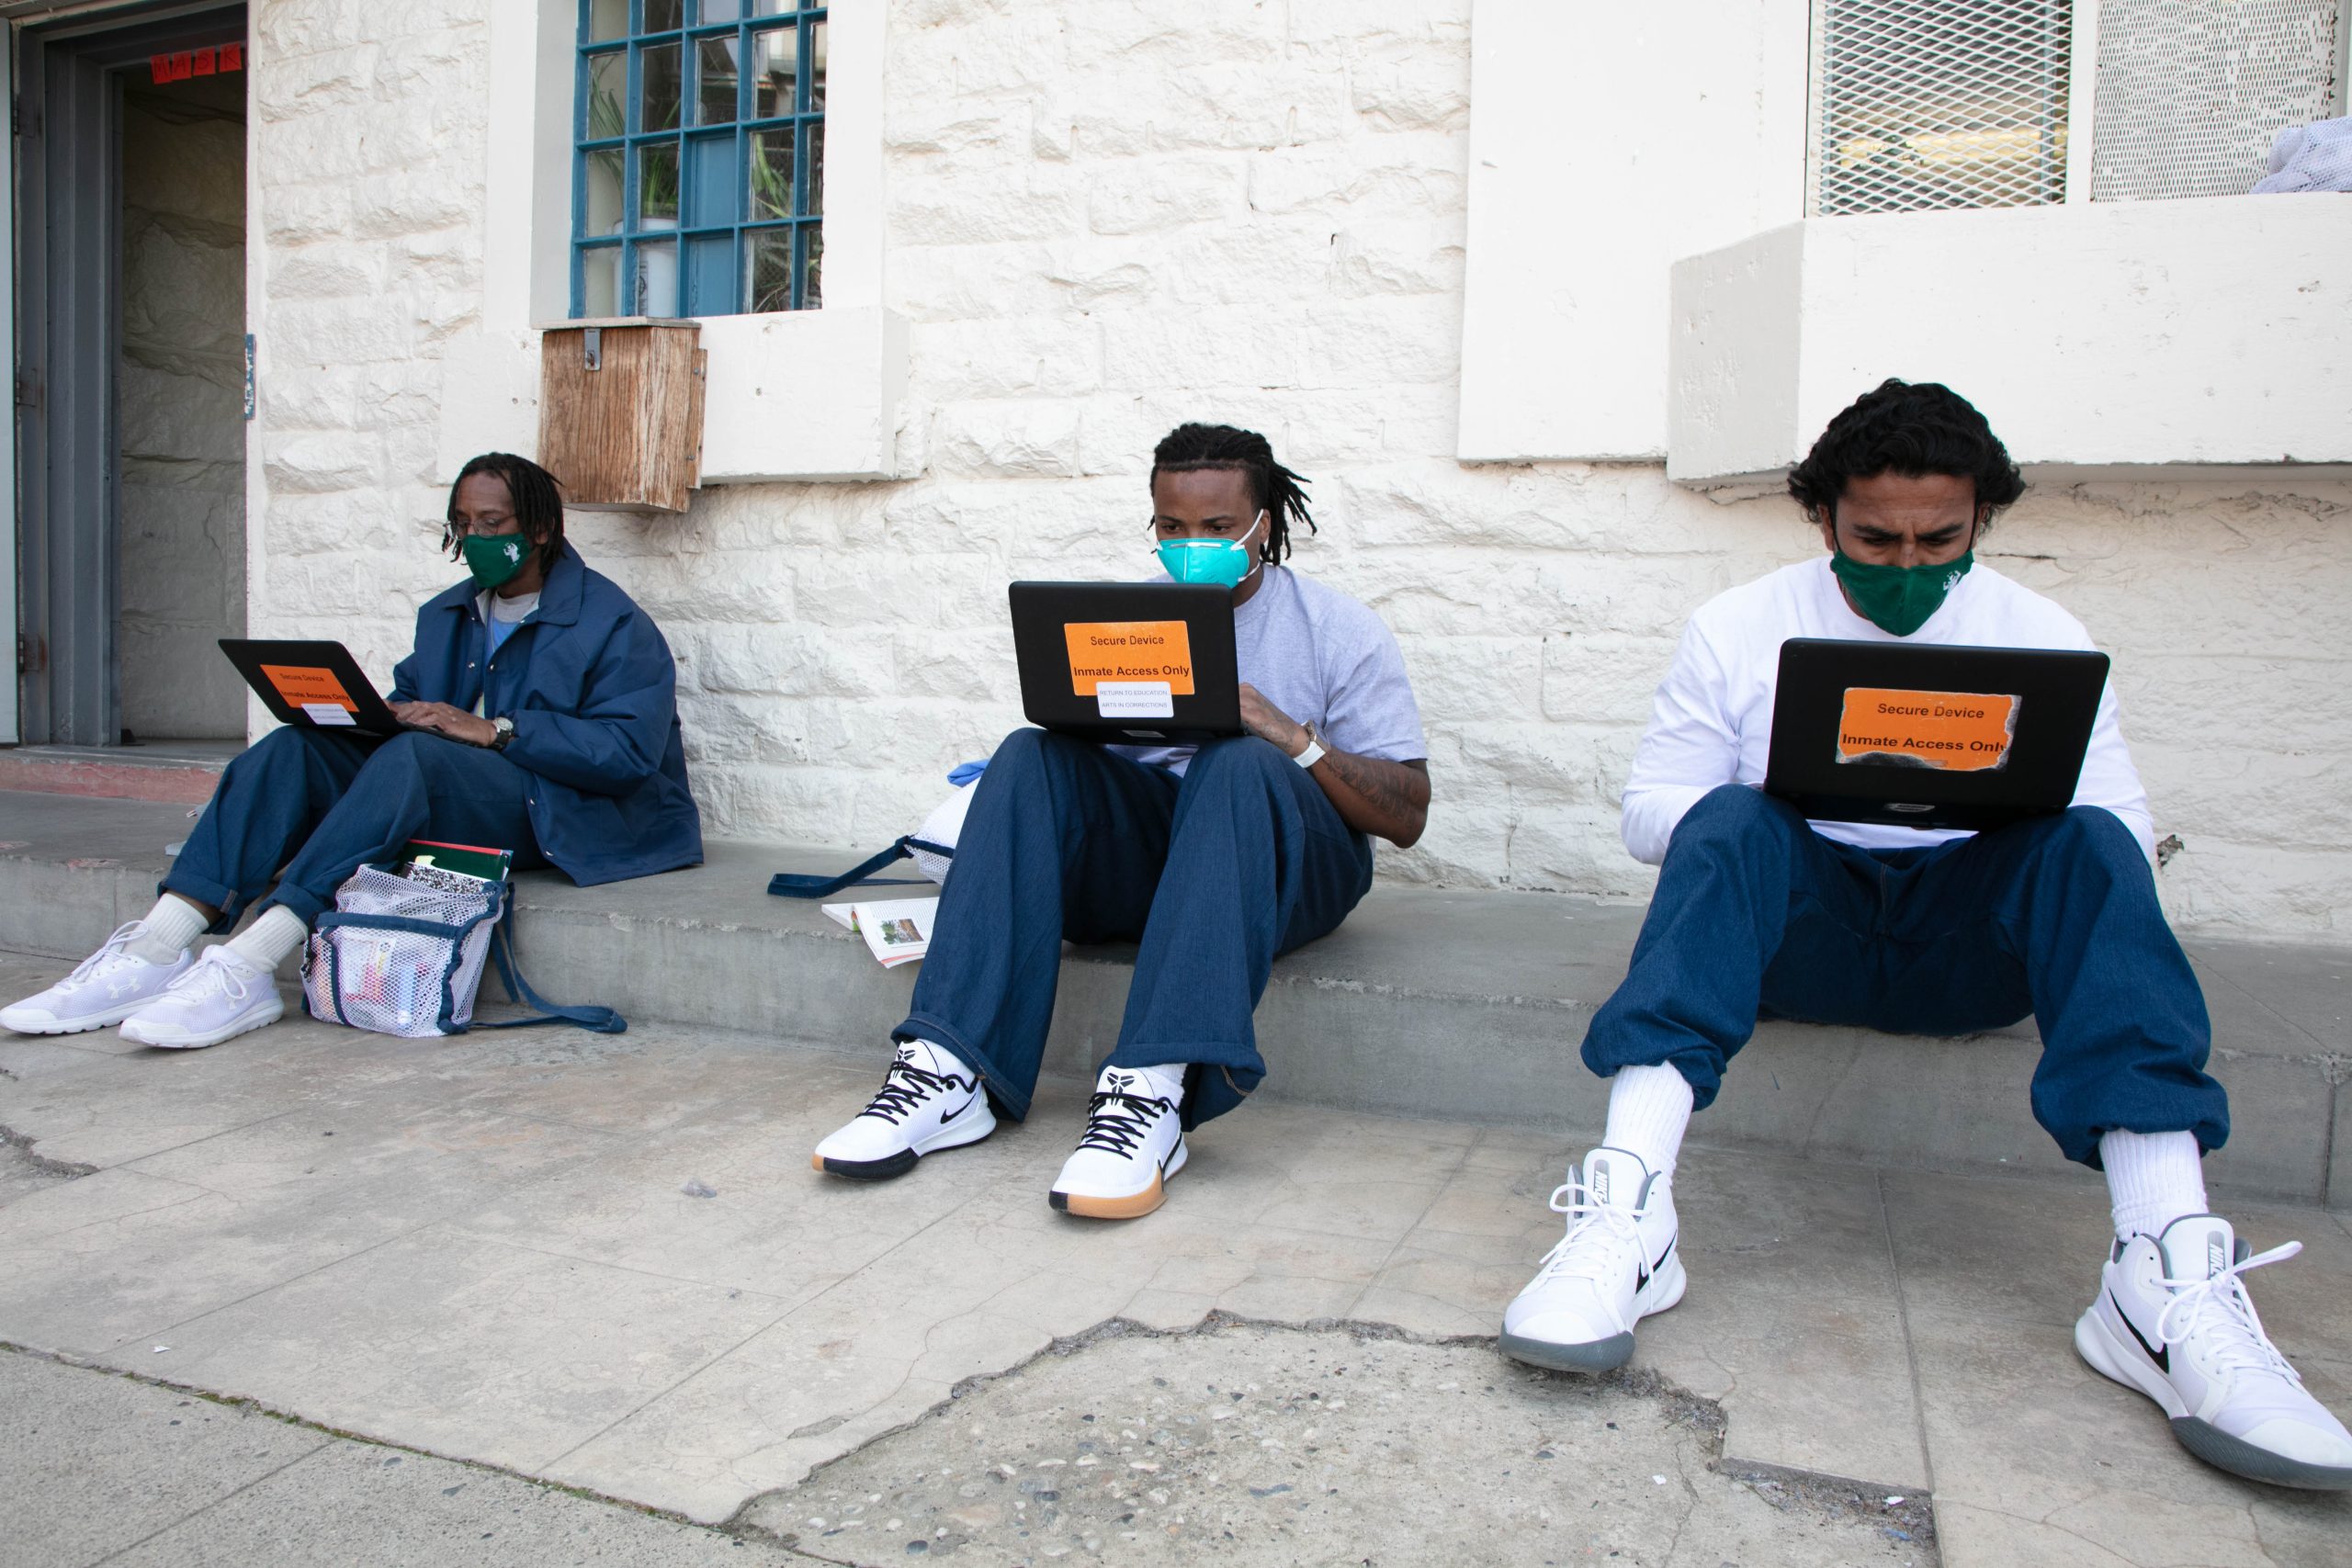 Three incarcerated men sit against a brick wall while using laptops.